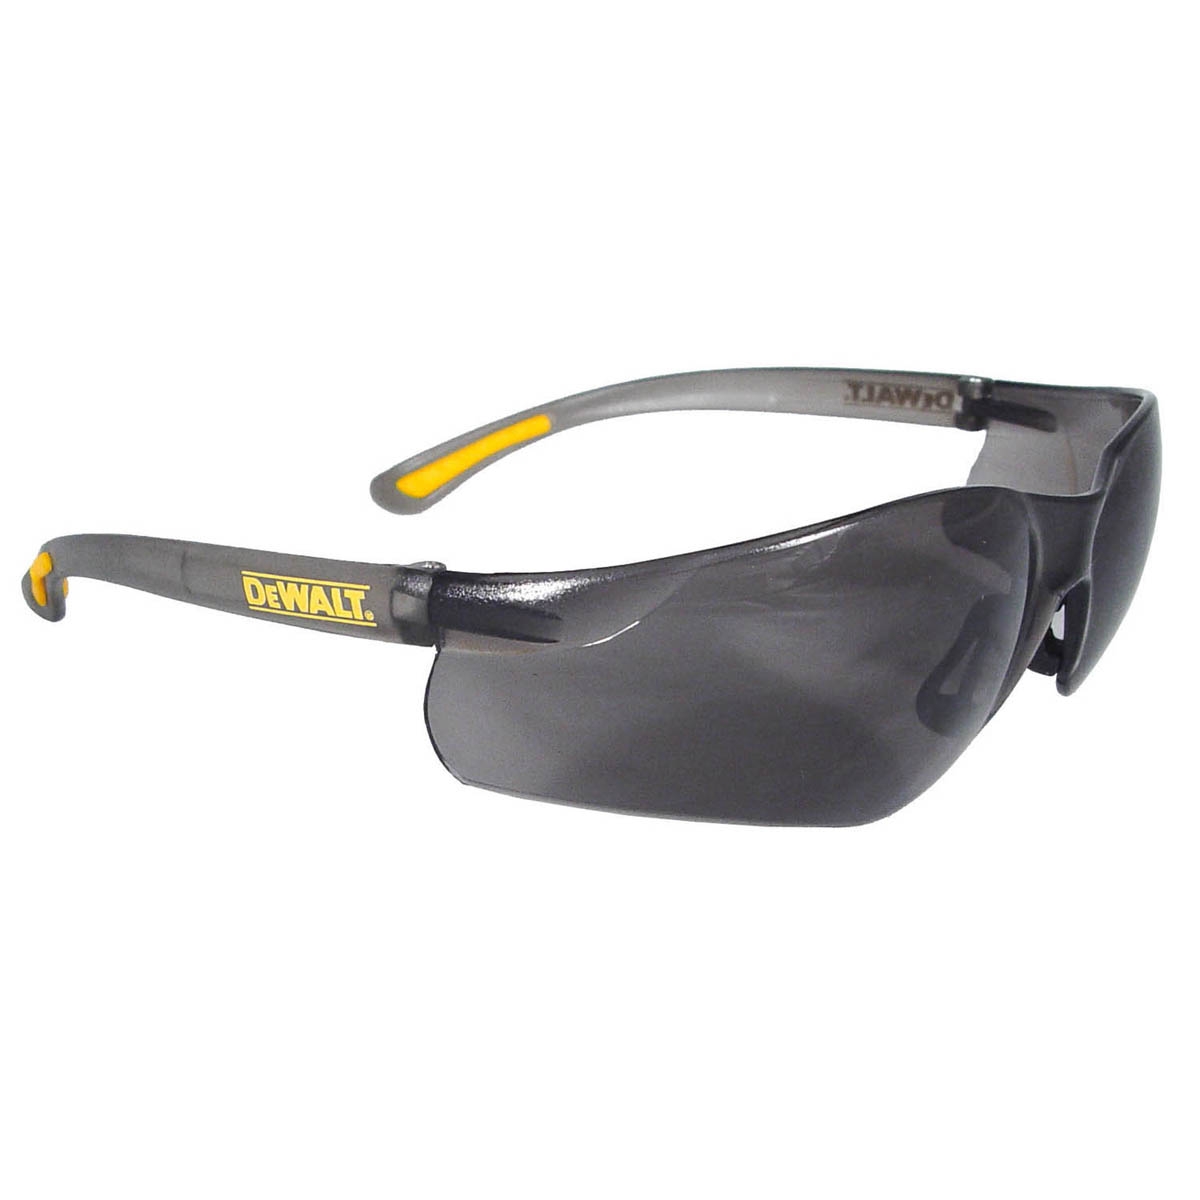 DeWalt DPG52-2 Contractor Pro Safety Glasses Gray Temples Smoke Lens  Full Source